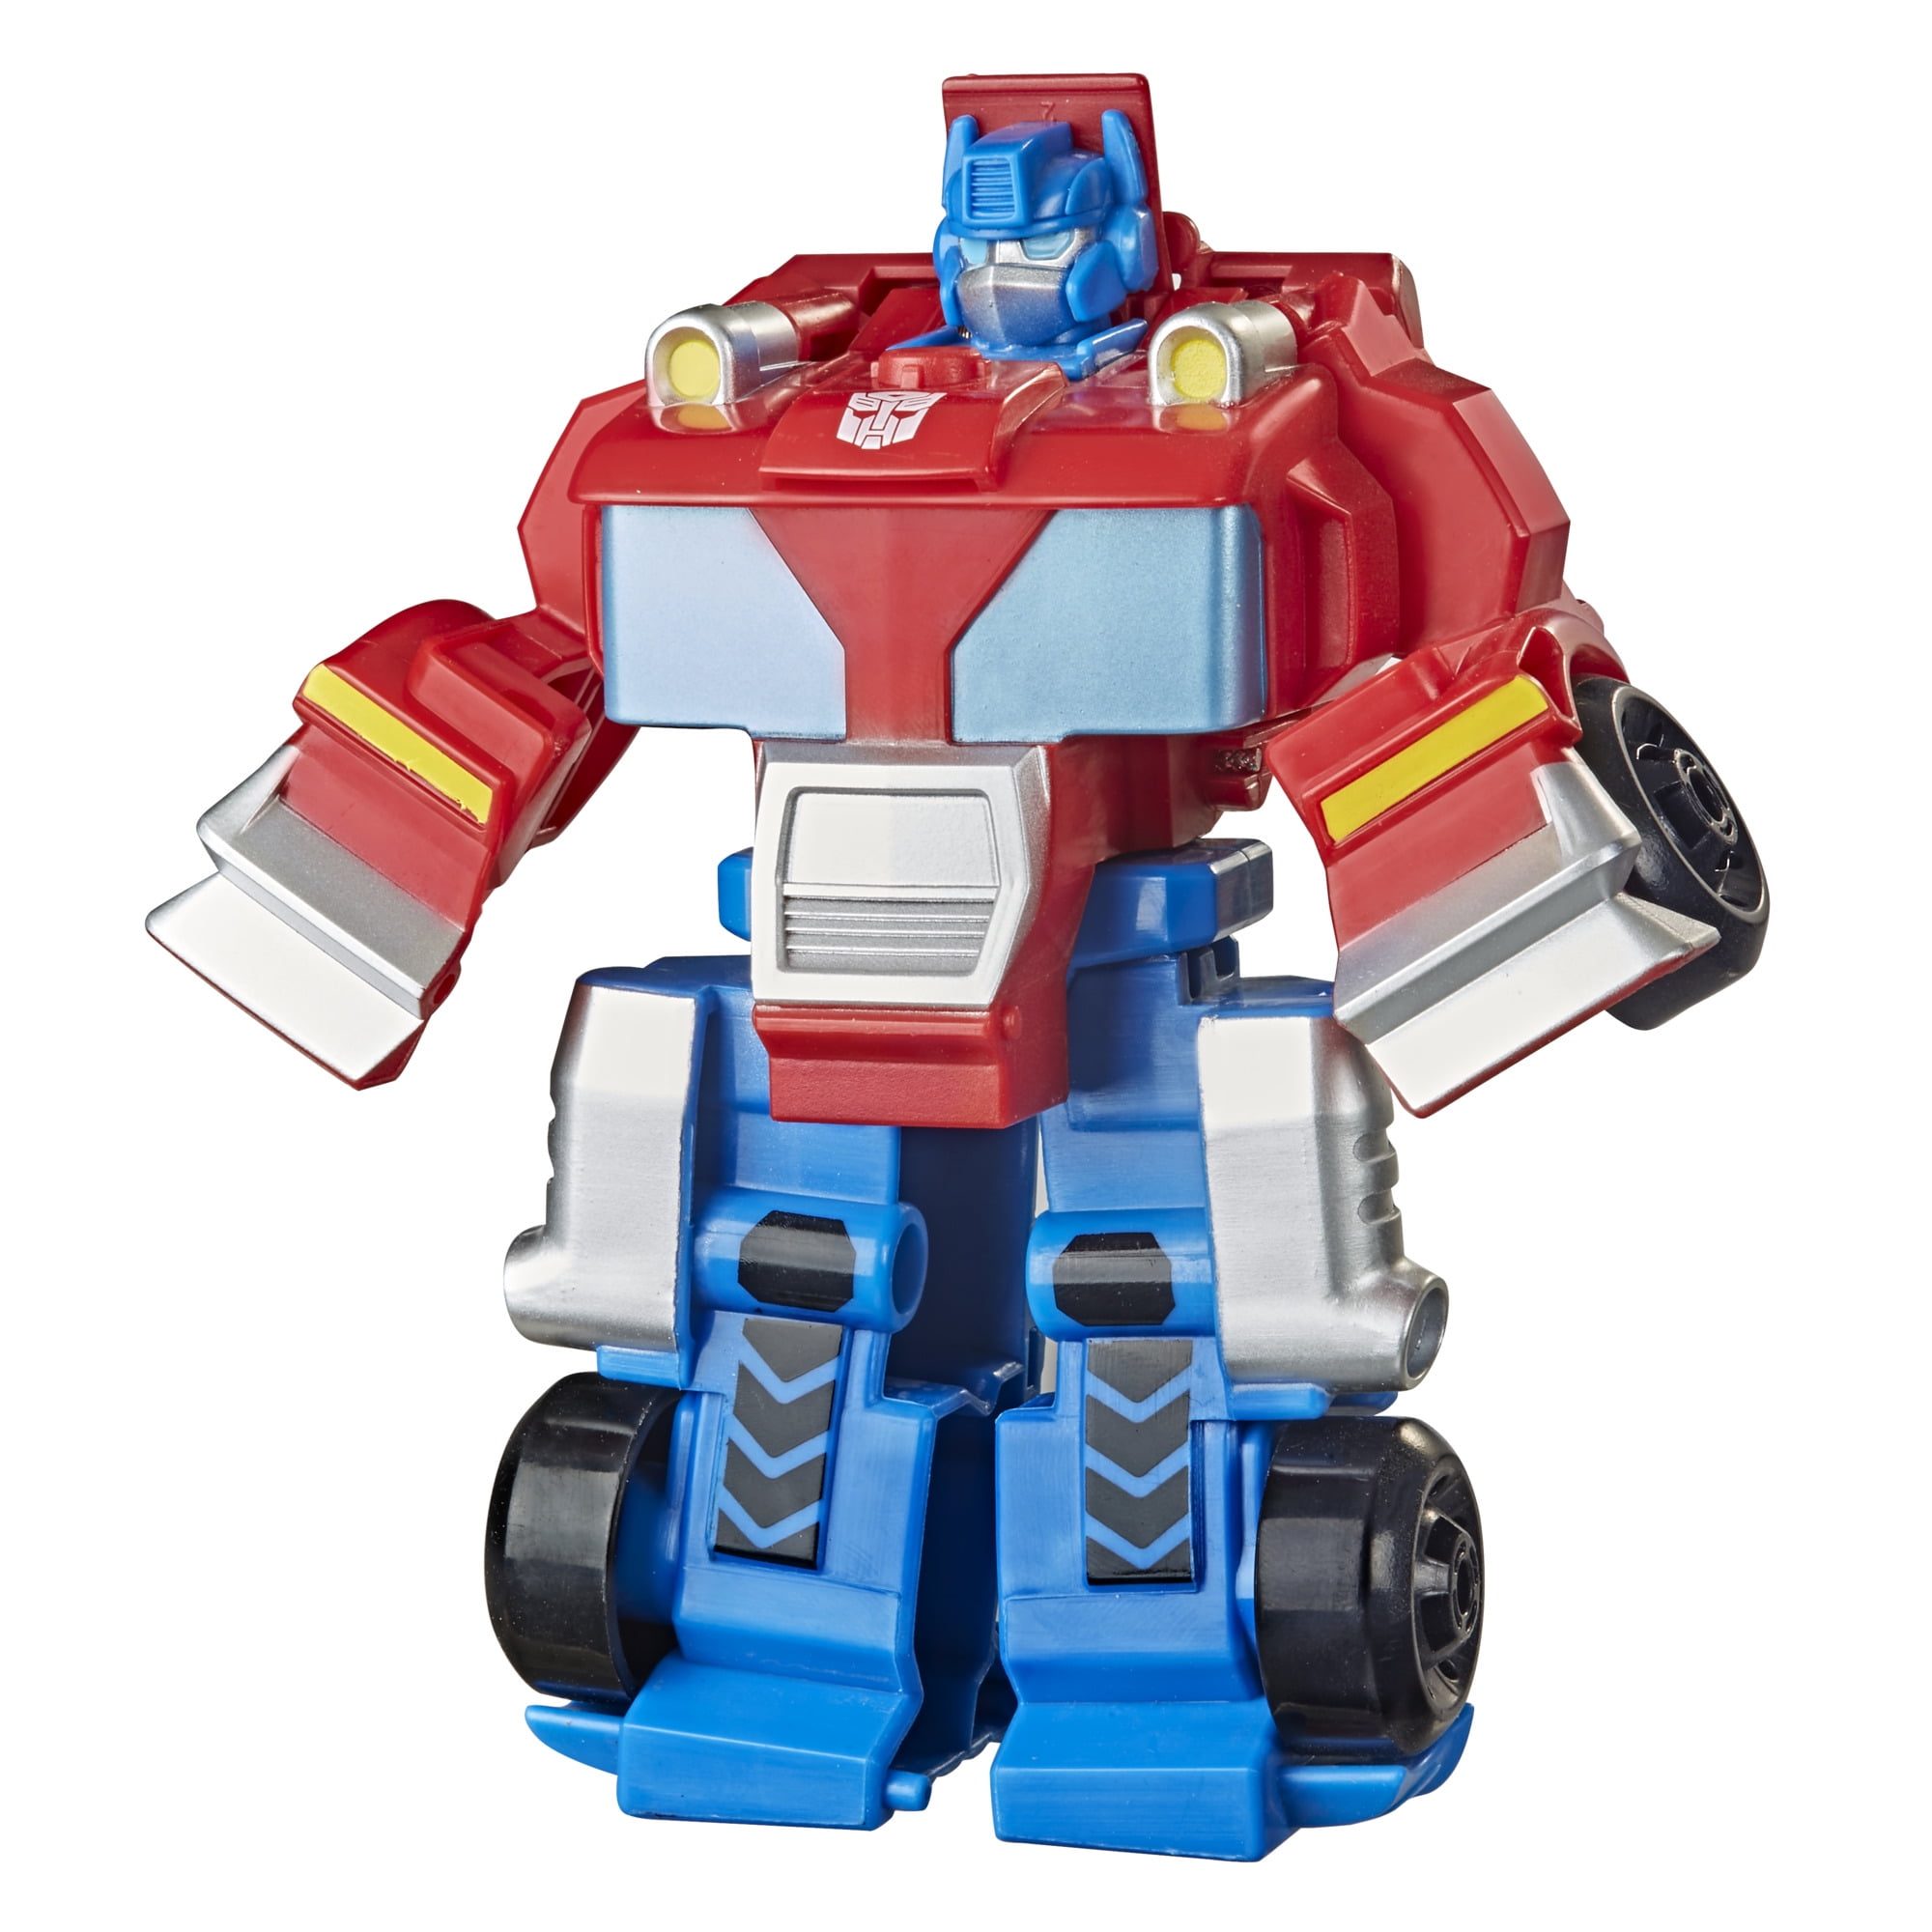 Timeless Large-Scale Figu Details about   Transformers Toys Heroic Optimus Prime Action Figure 